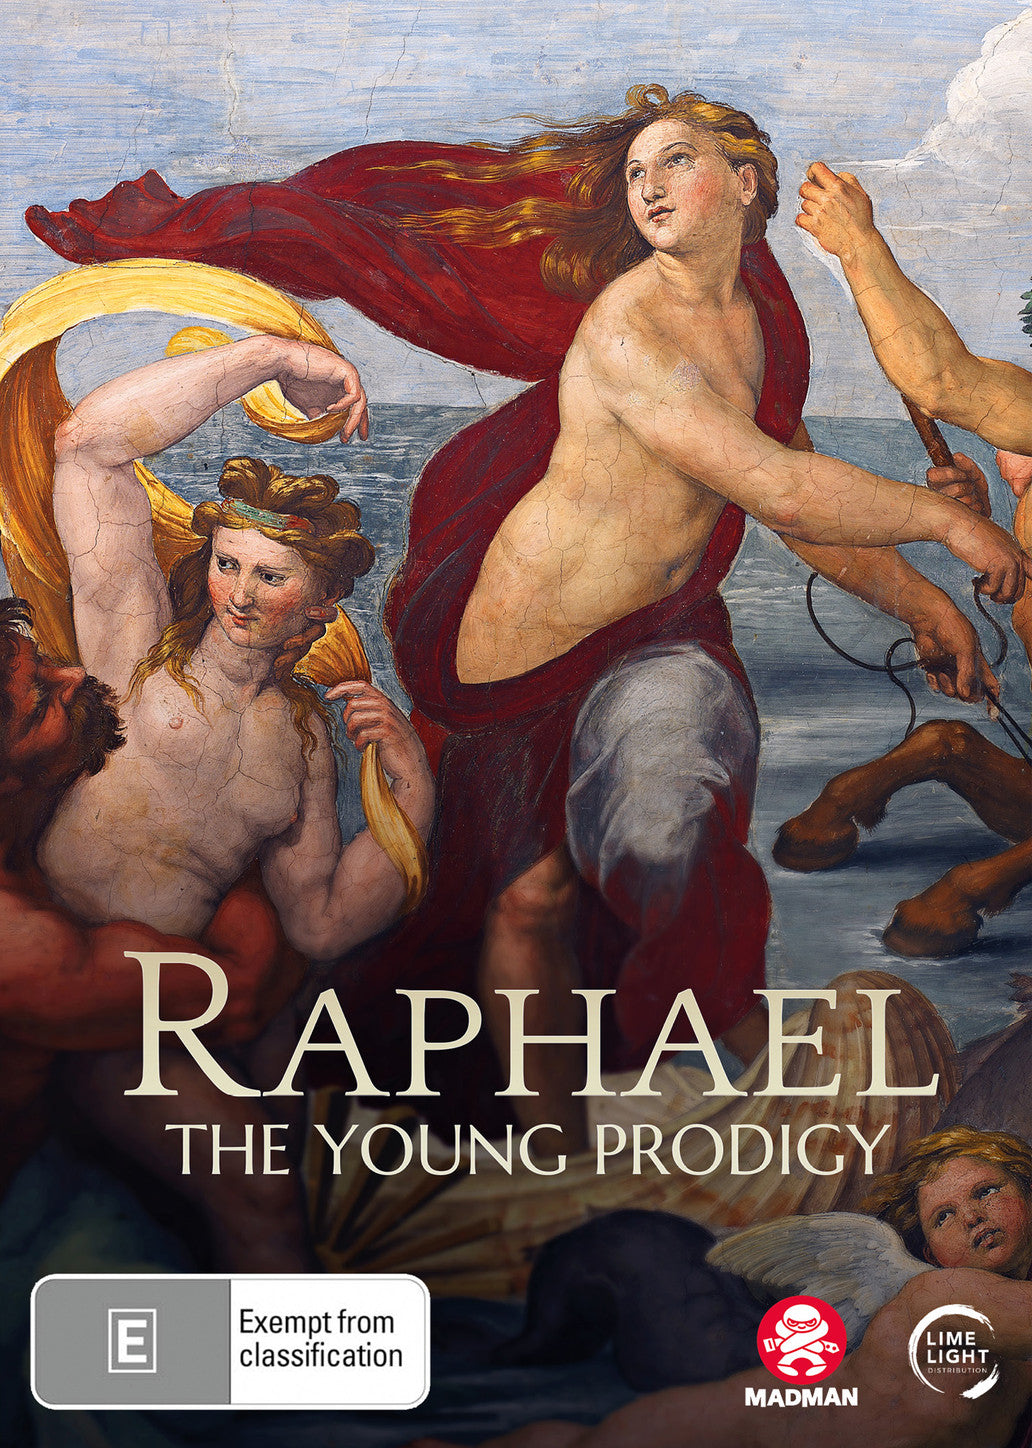 RAPHAEL: THE YOUNG PRODIGY